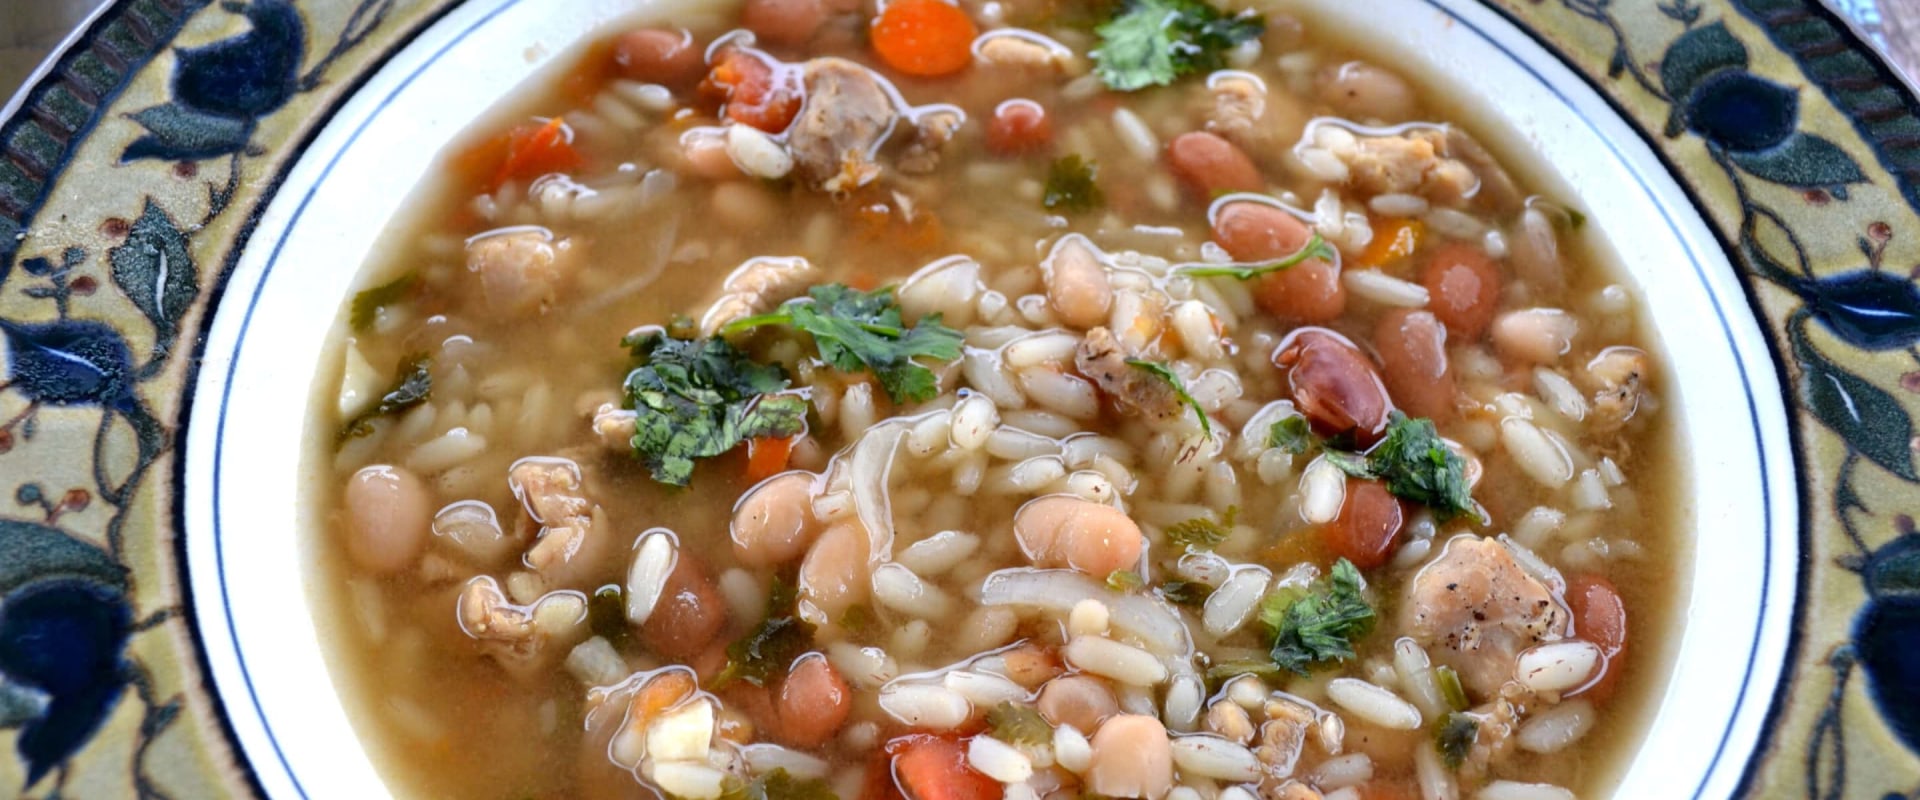 Family-friendly Soups: An Engaging and Informative Guide